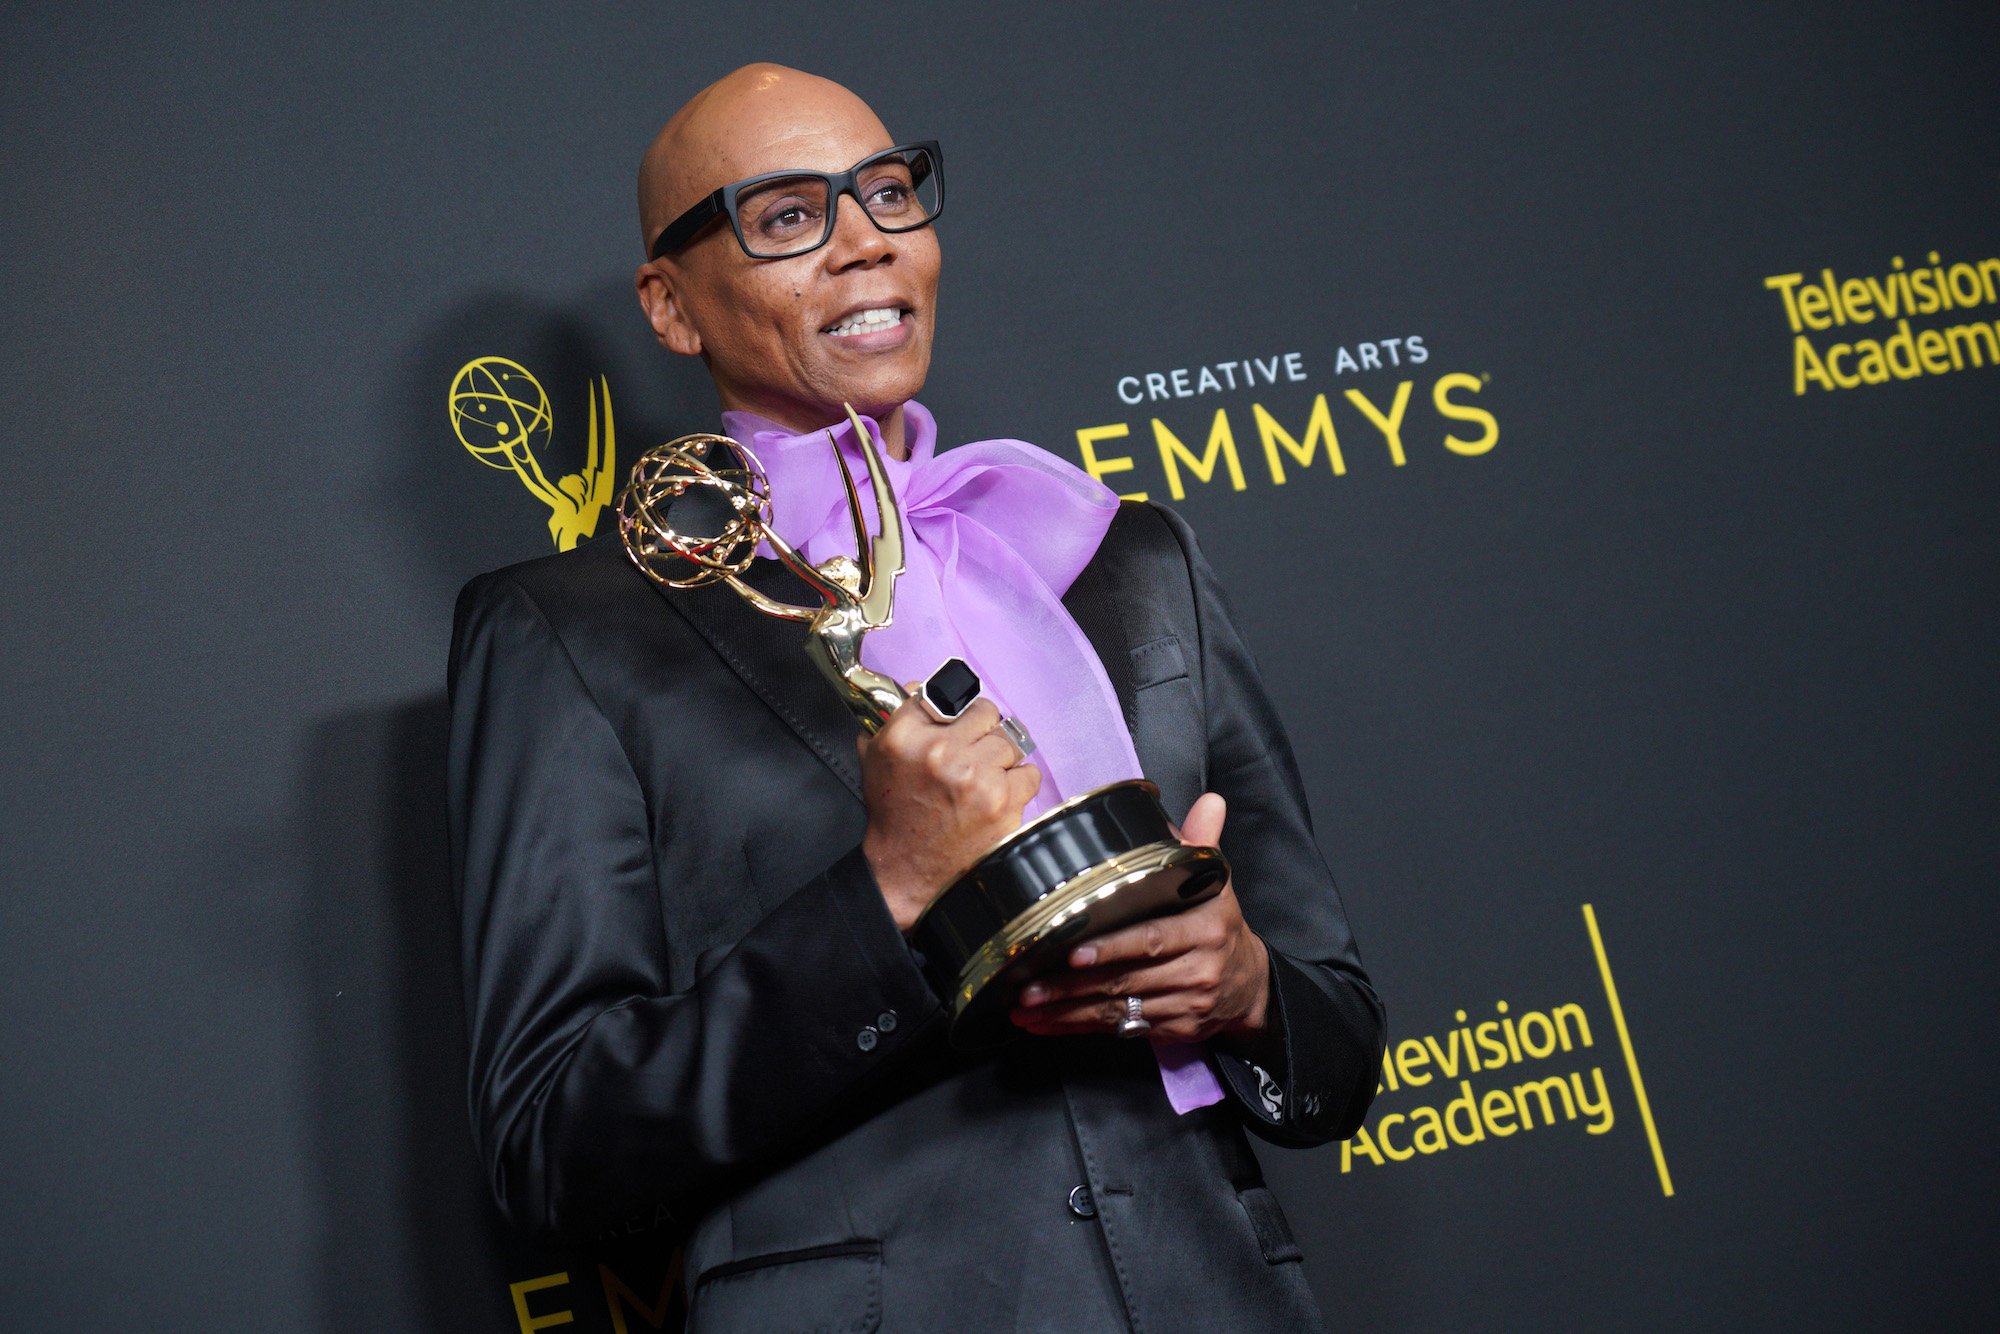 'RuPaul's Drag Race' host RuPaul Charles posing with an Emmy at the 2019 Emmy Awards